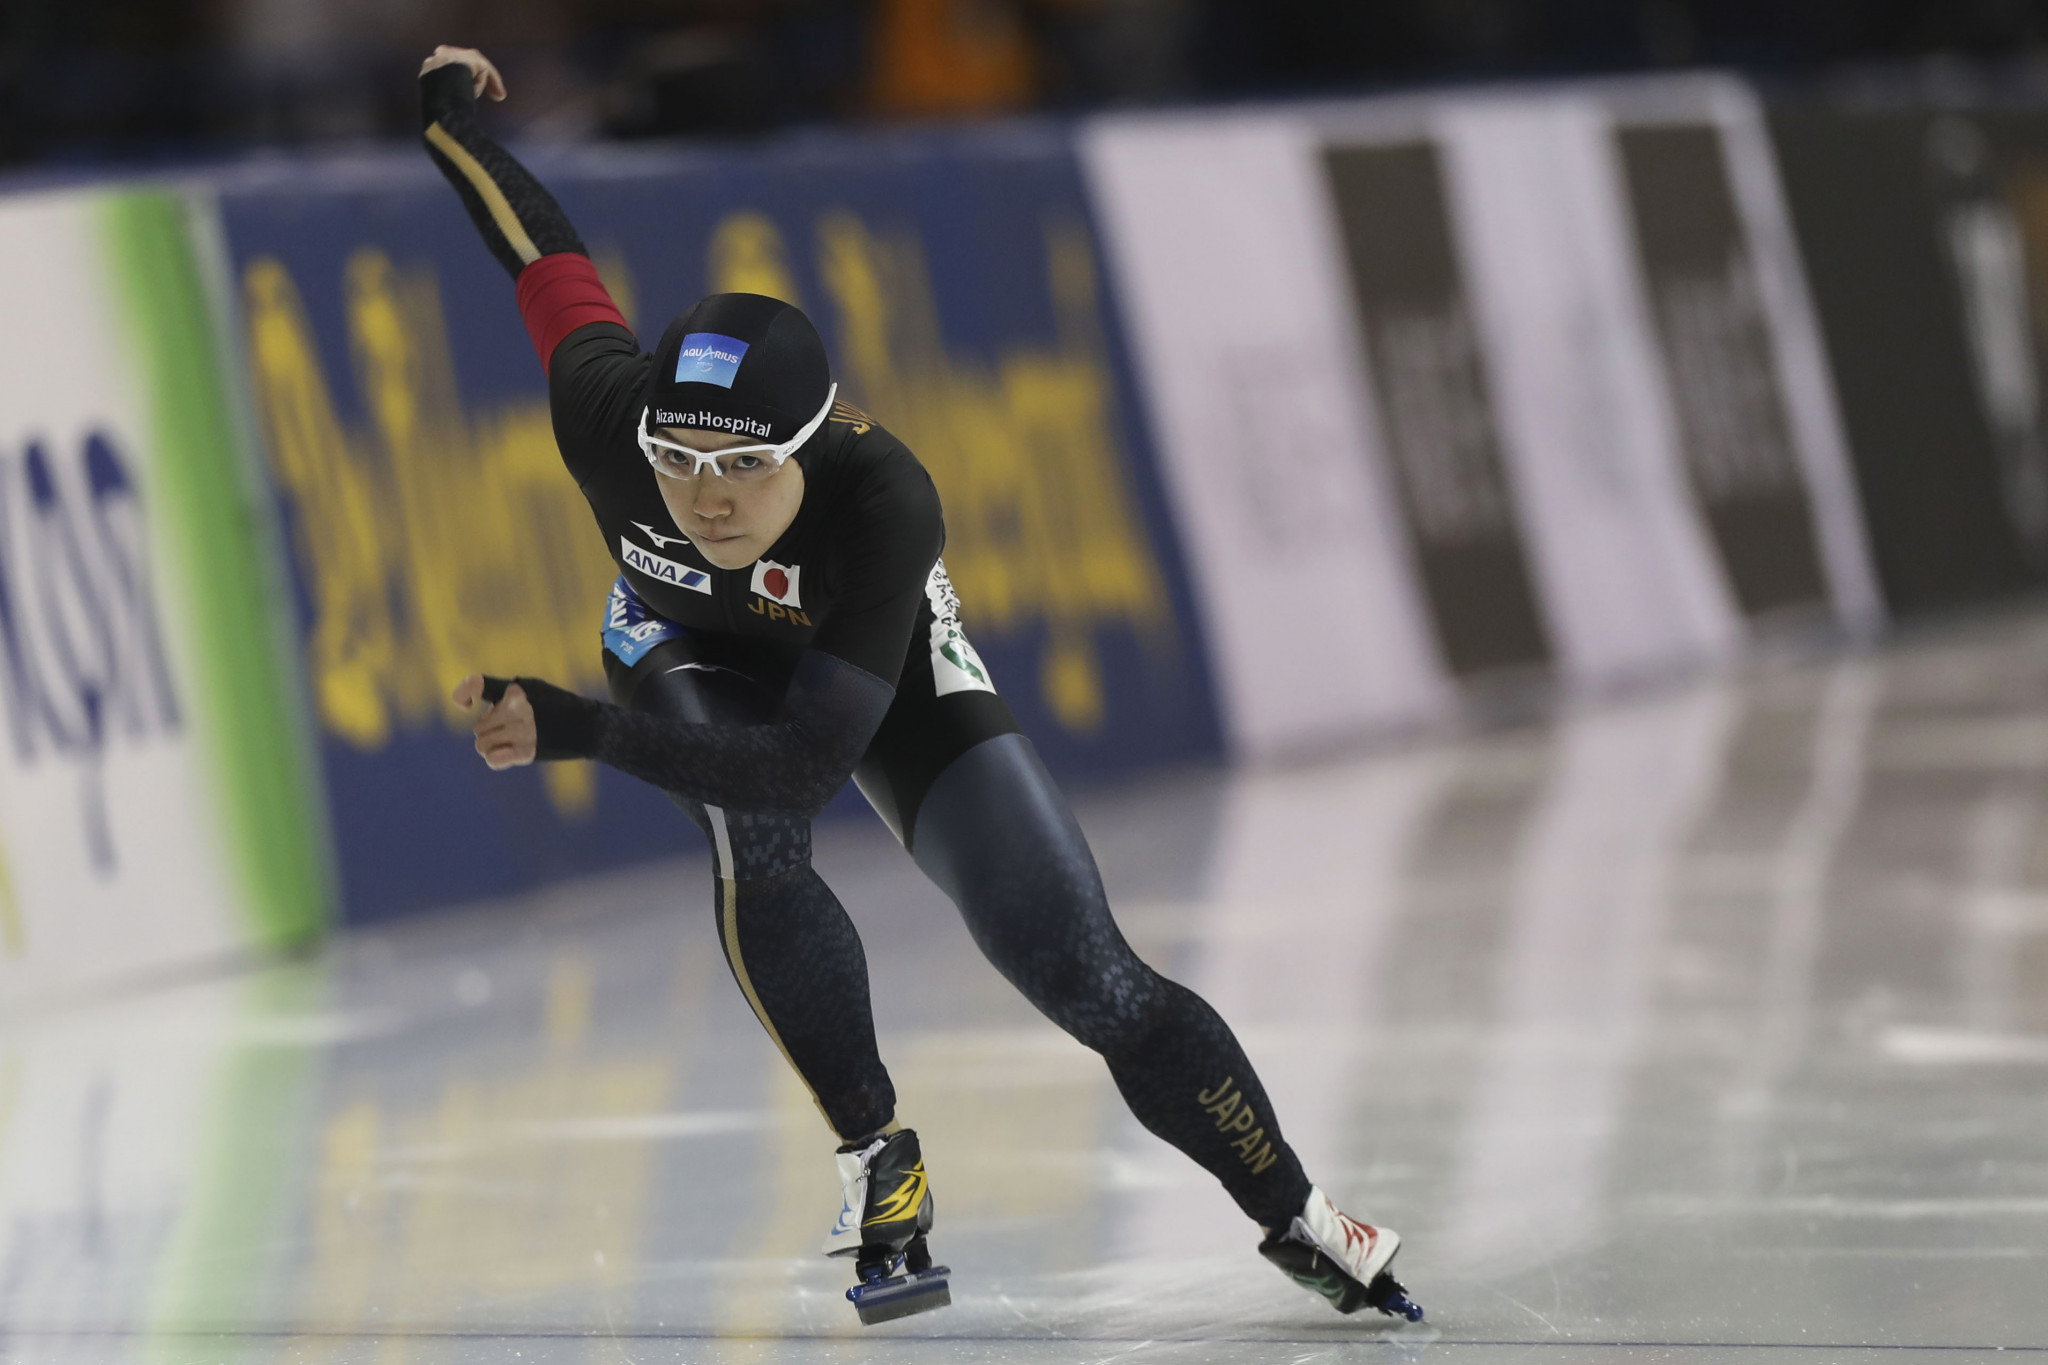 Olympic 500 metres champion Nao Kodaira of Japan is the leader at the halfway stage of the women's event ©Getty Images